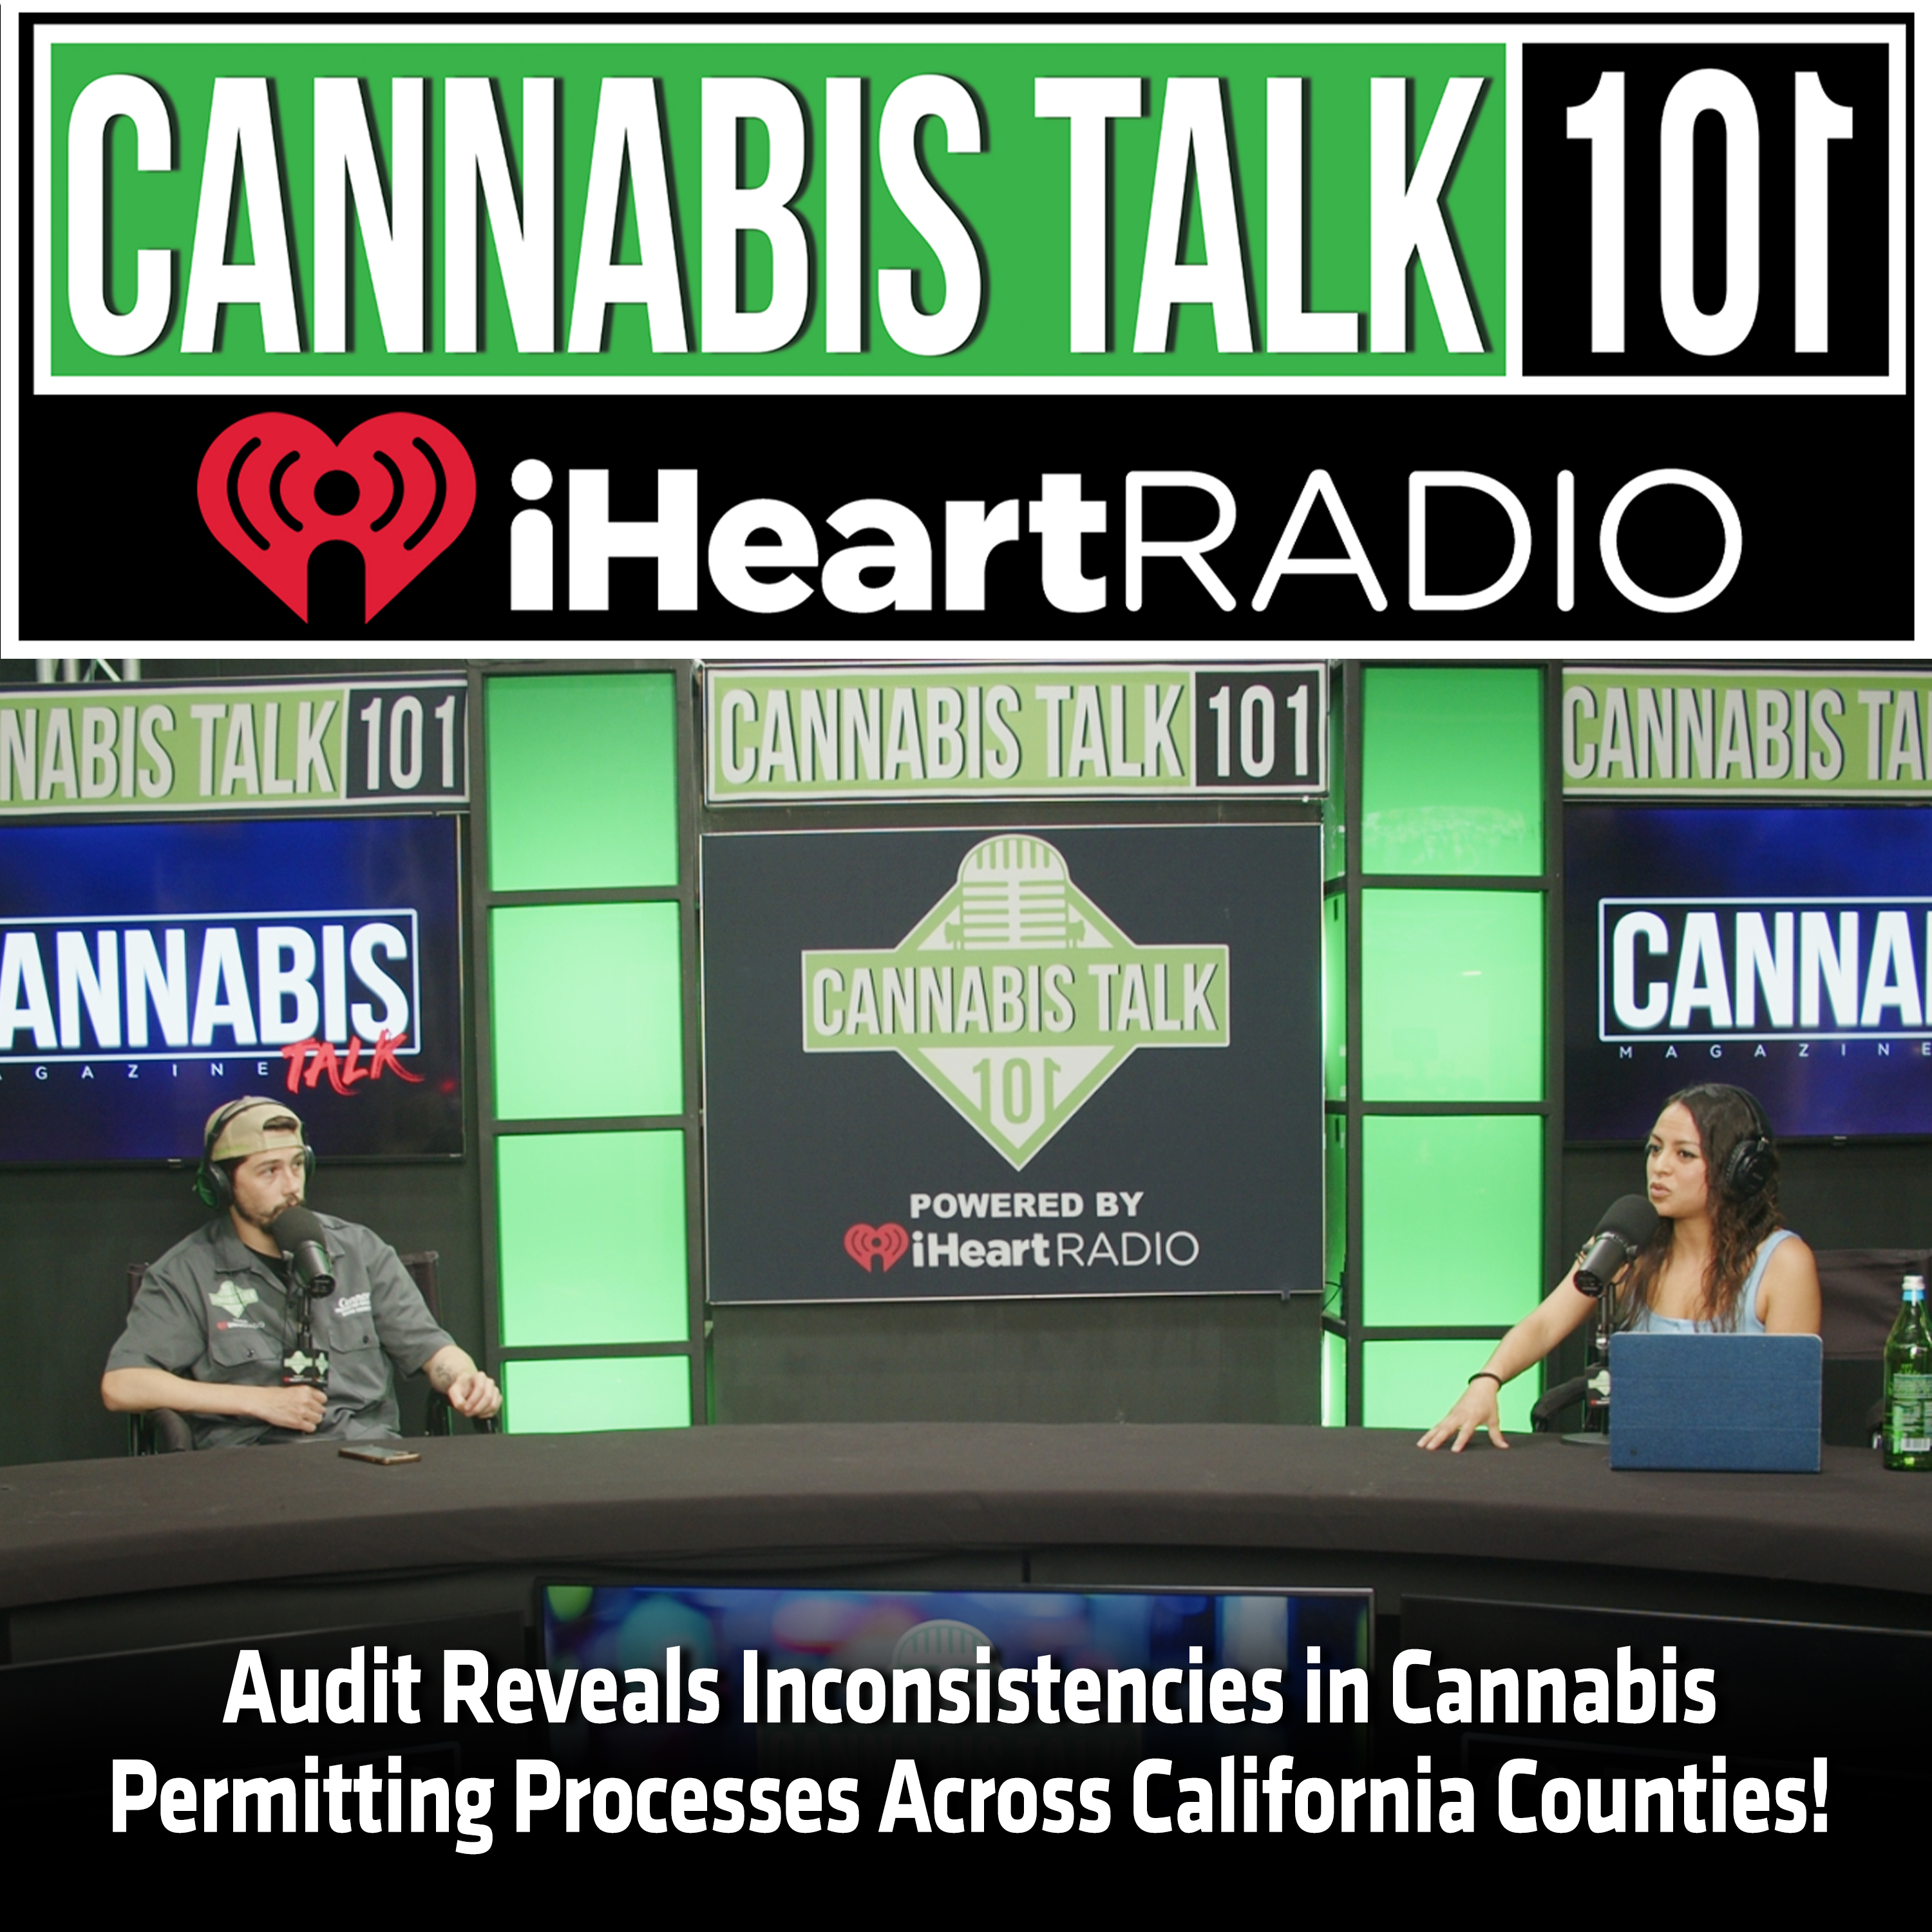 Audit Reveals Inconsistencies in Cannabis Permitting Processes Across California Counties!